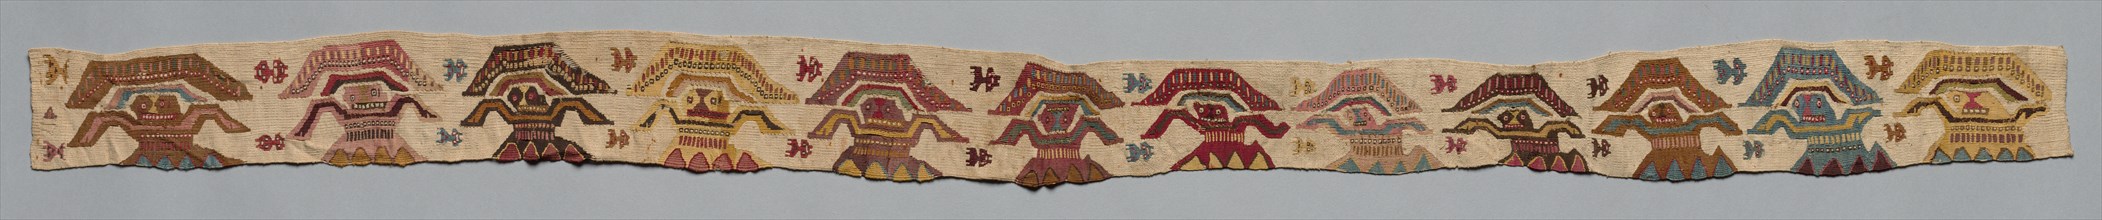 Lower Border of a Garment, 1000-1470s. Central Andes, North Coast, Chimu or Lambayeque (Sican)